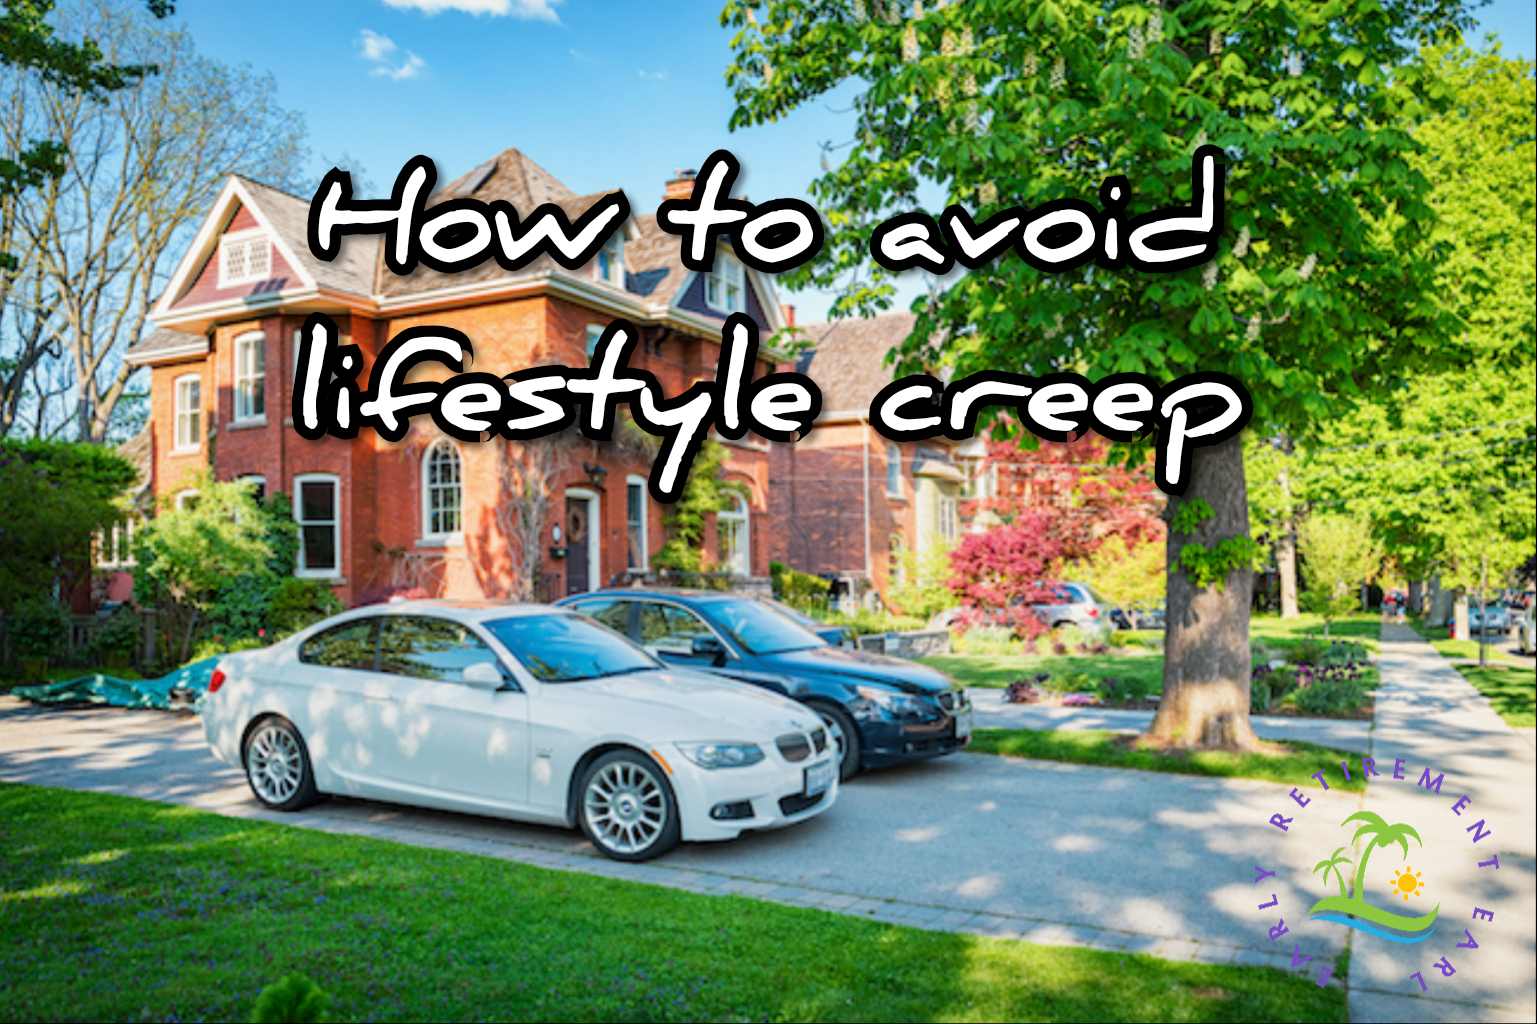 Lifestyle Creep Prevention Methods that Actually Work